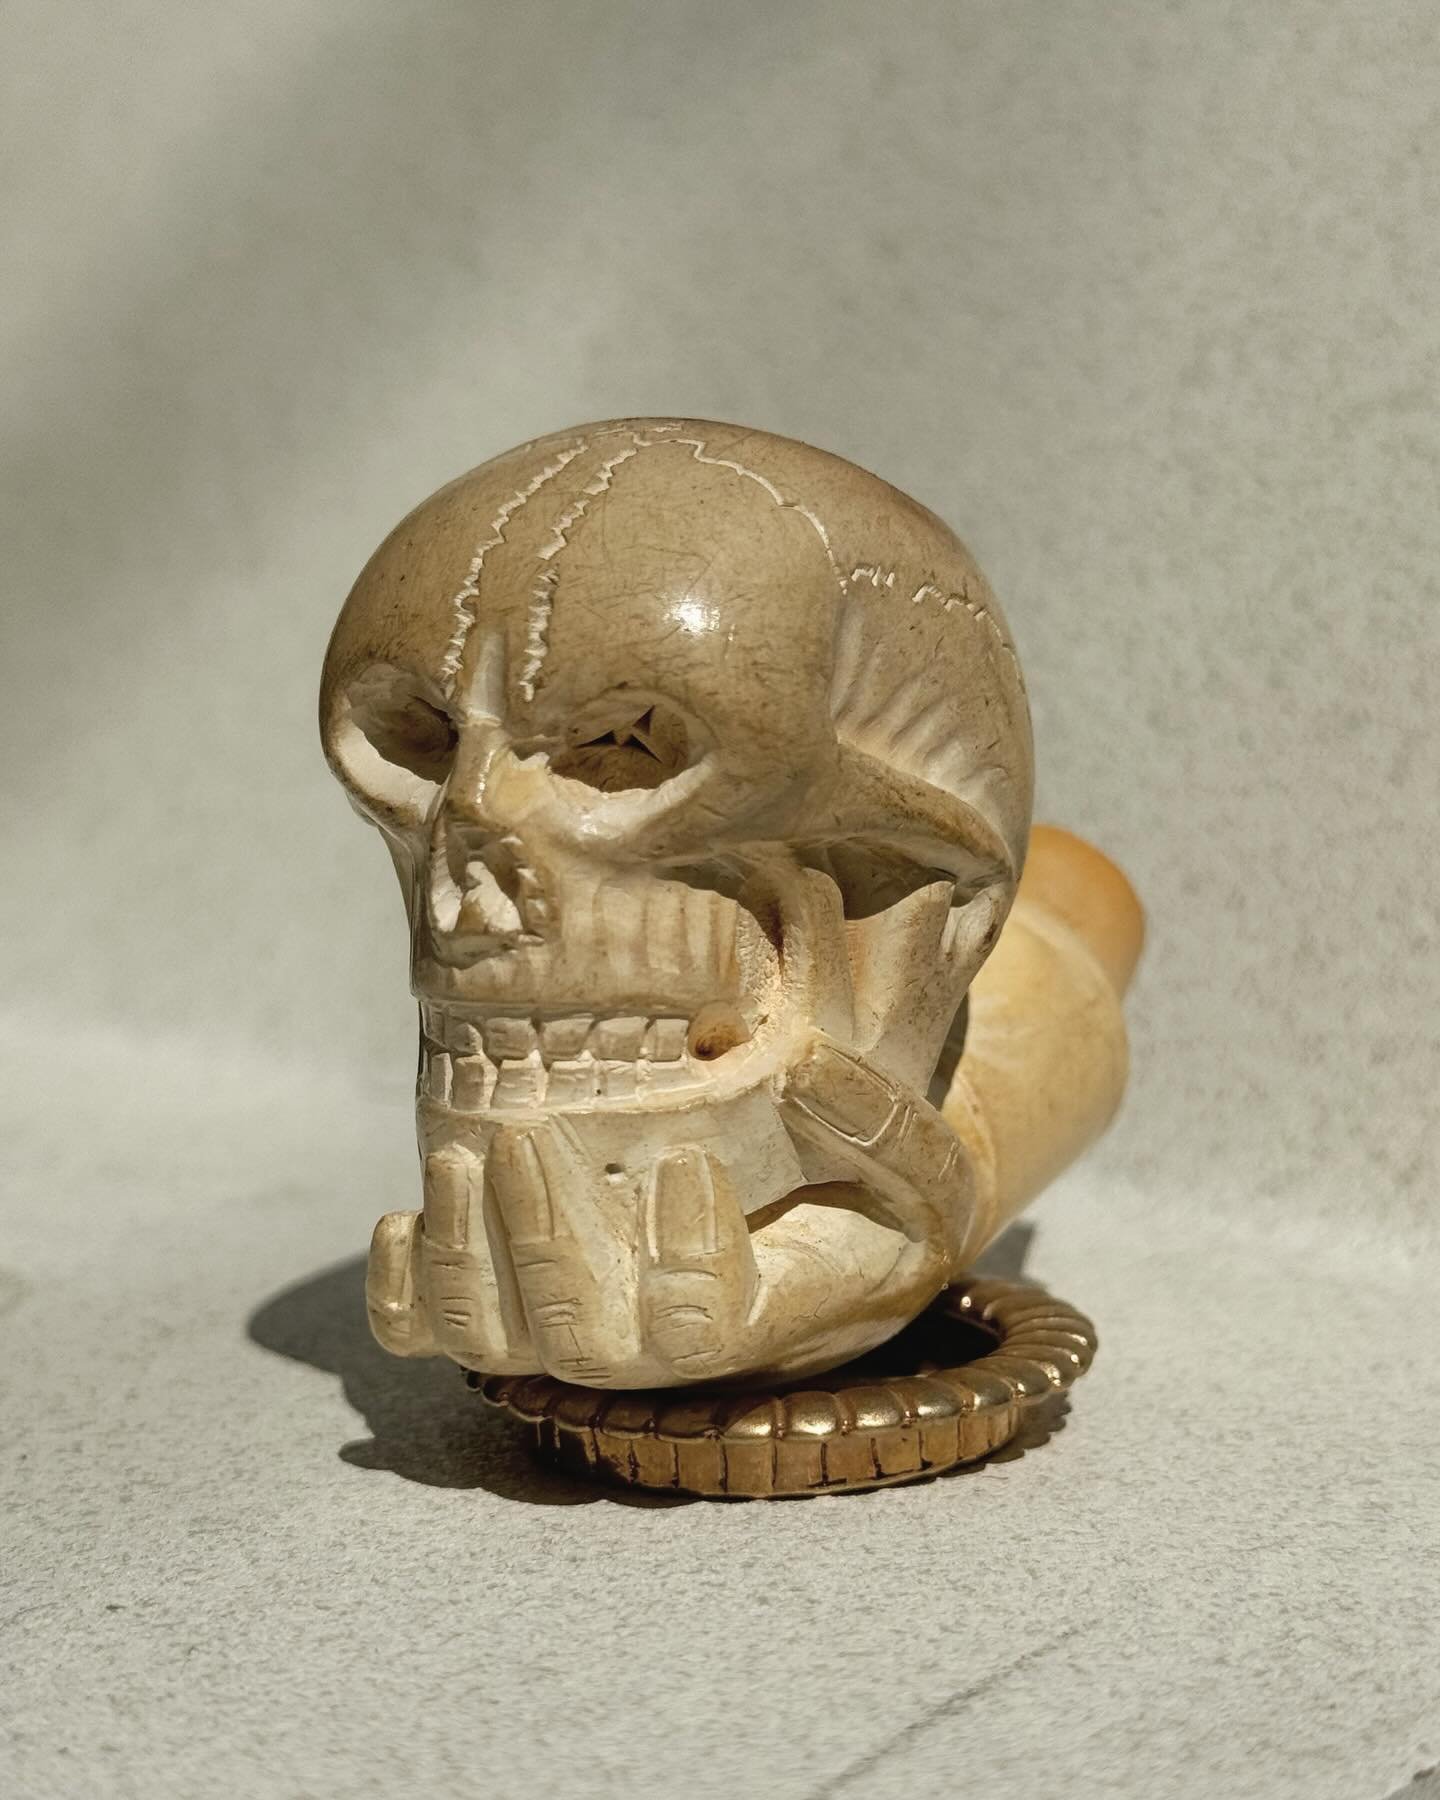 Antique Hand Carved Meerschaum Pipe &bull; Missing Mouthpiece &bull; 2 1/2&rdquo; long &bull; SOLD
&bull;
&bull;
&bull;
&bull;
#pipe #smoke #tobacco #meerschaum #meerschaumpipe #skull #carved #antique #handmade #tobacconist #oneofakind #hand #hold #d